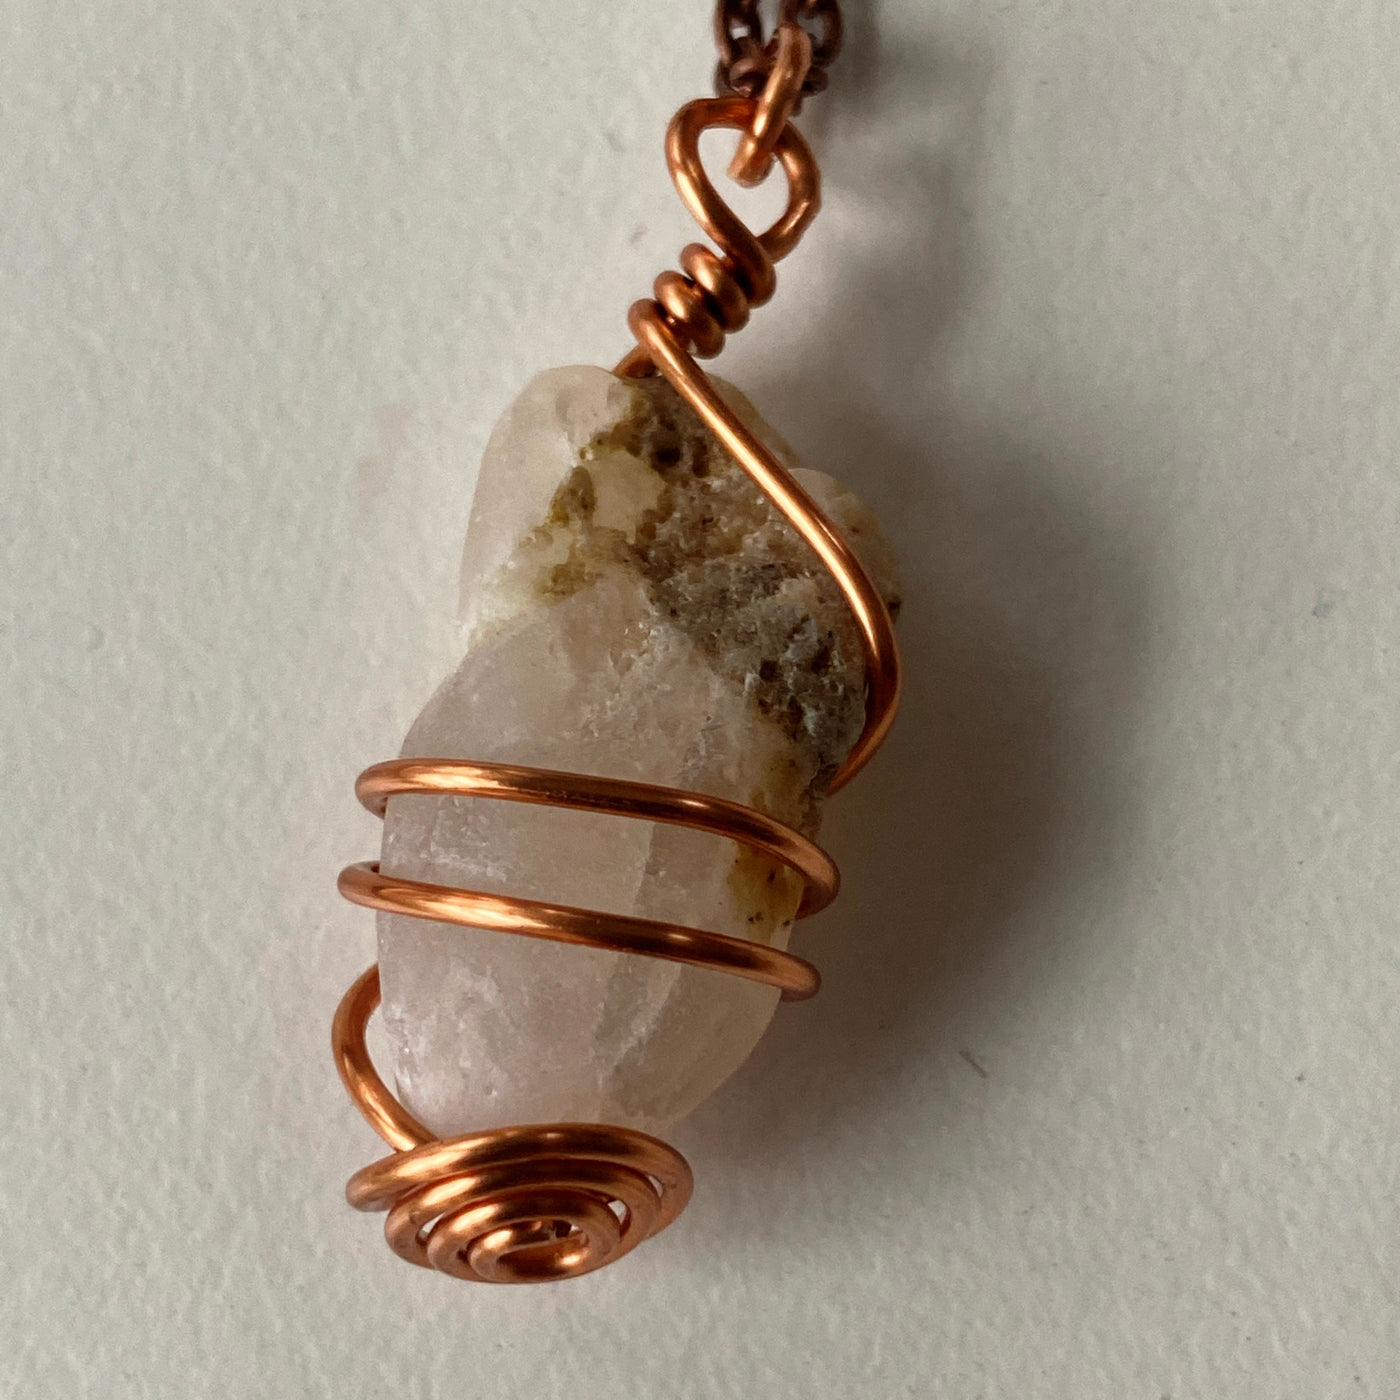 Small pendant. White natural stone and wire in Elbastones collection.